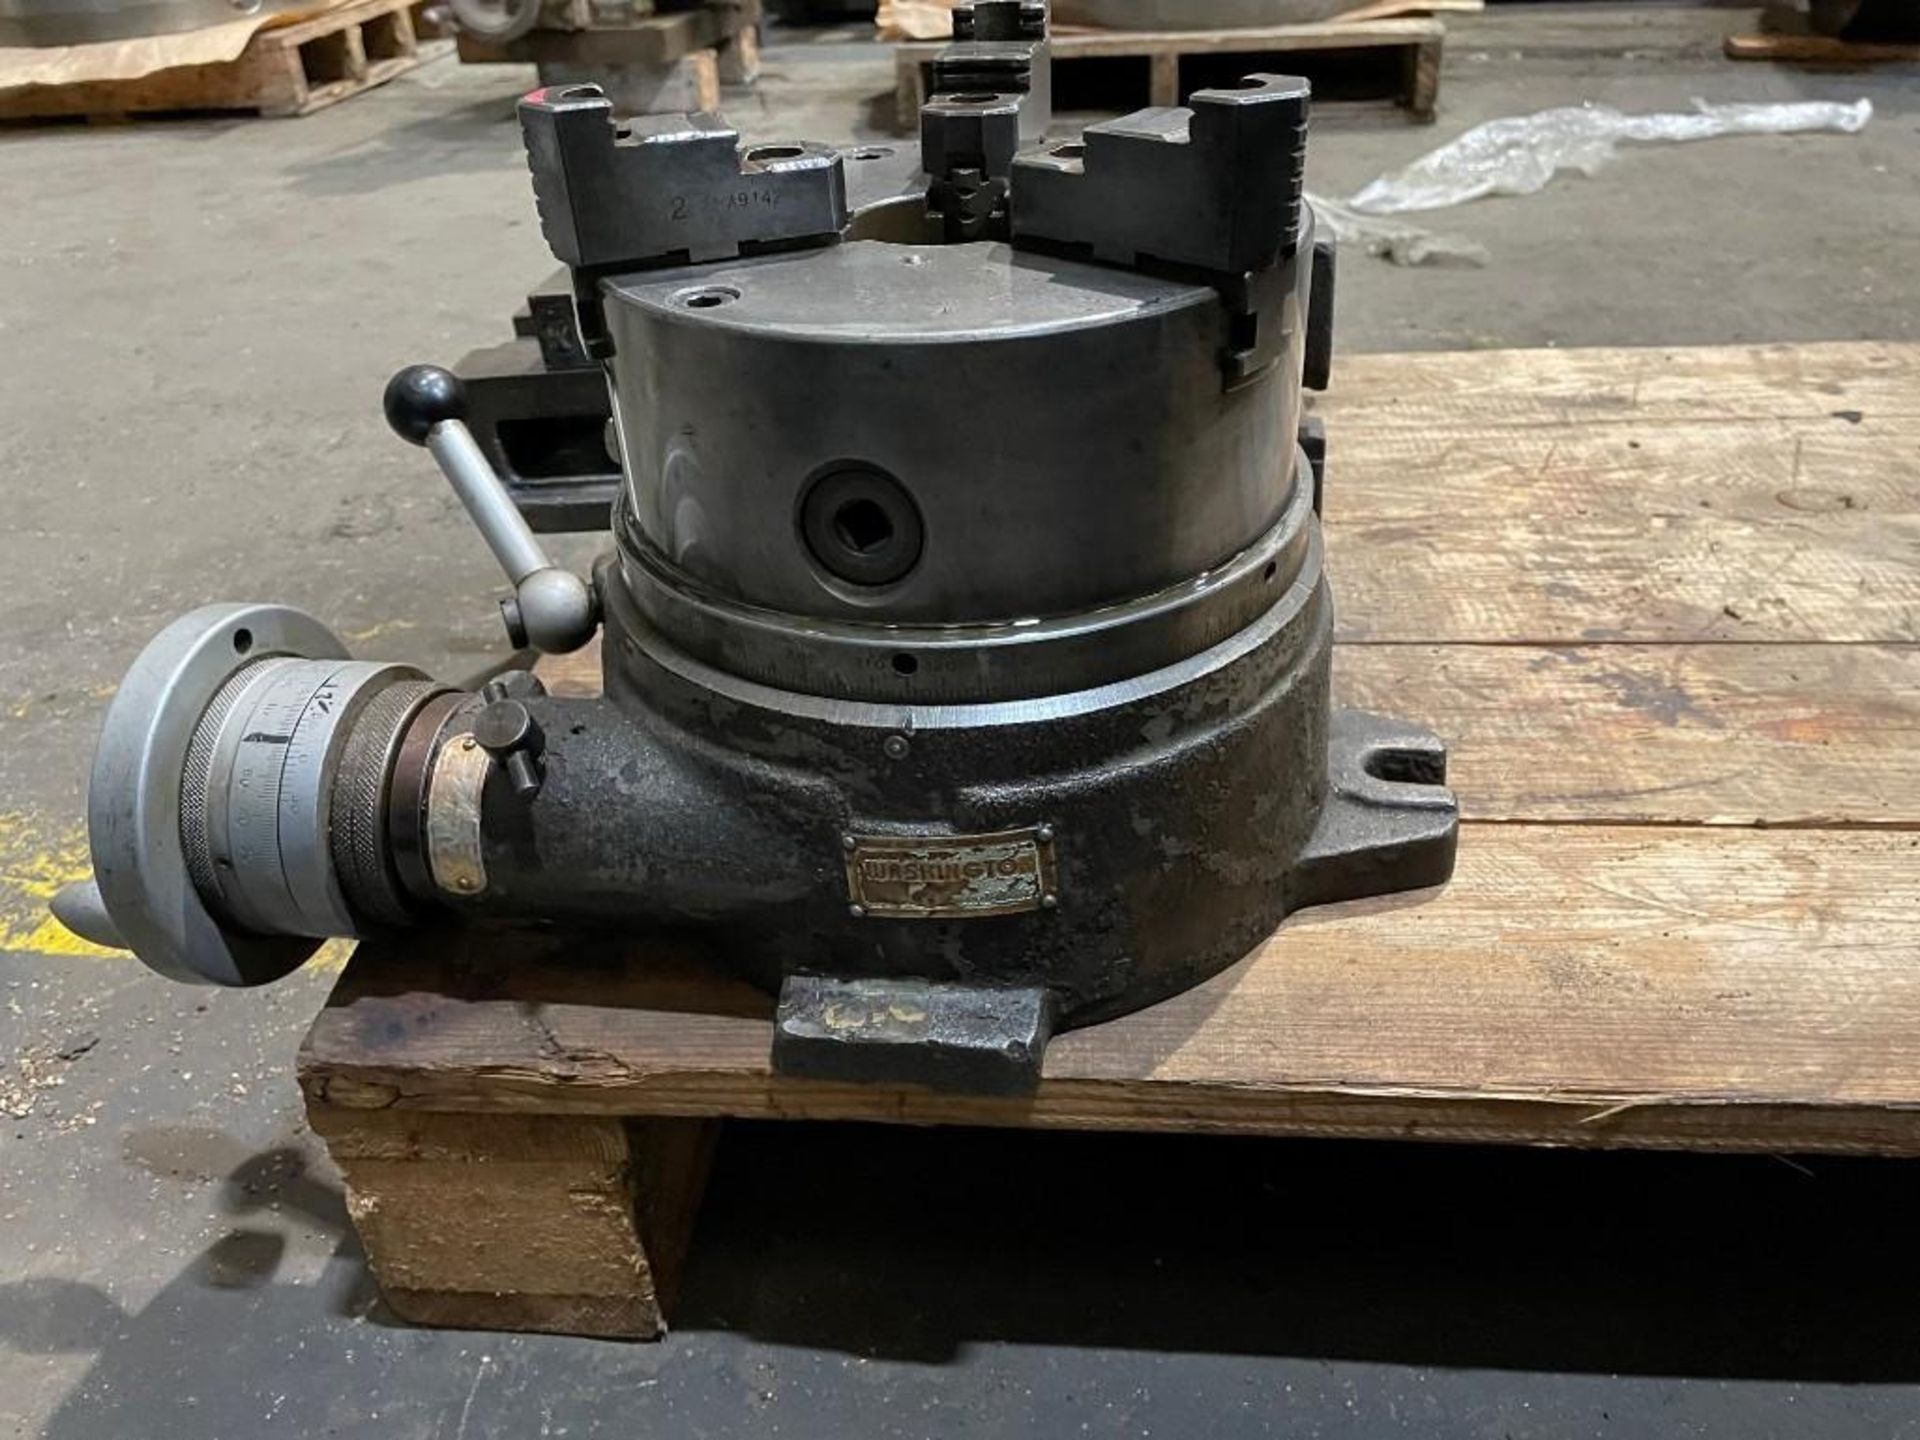 Rotary Table with 8" Strong 3-Jaw Chuck - See Photo - Image 2 of 5